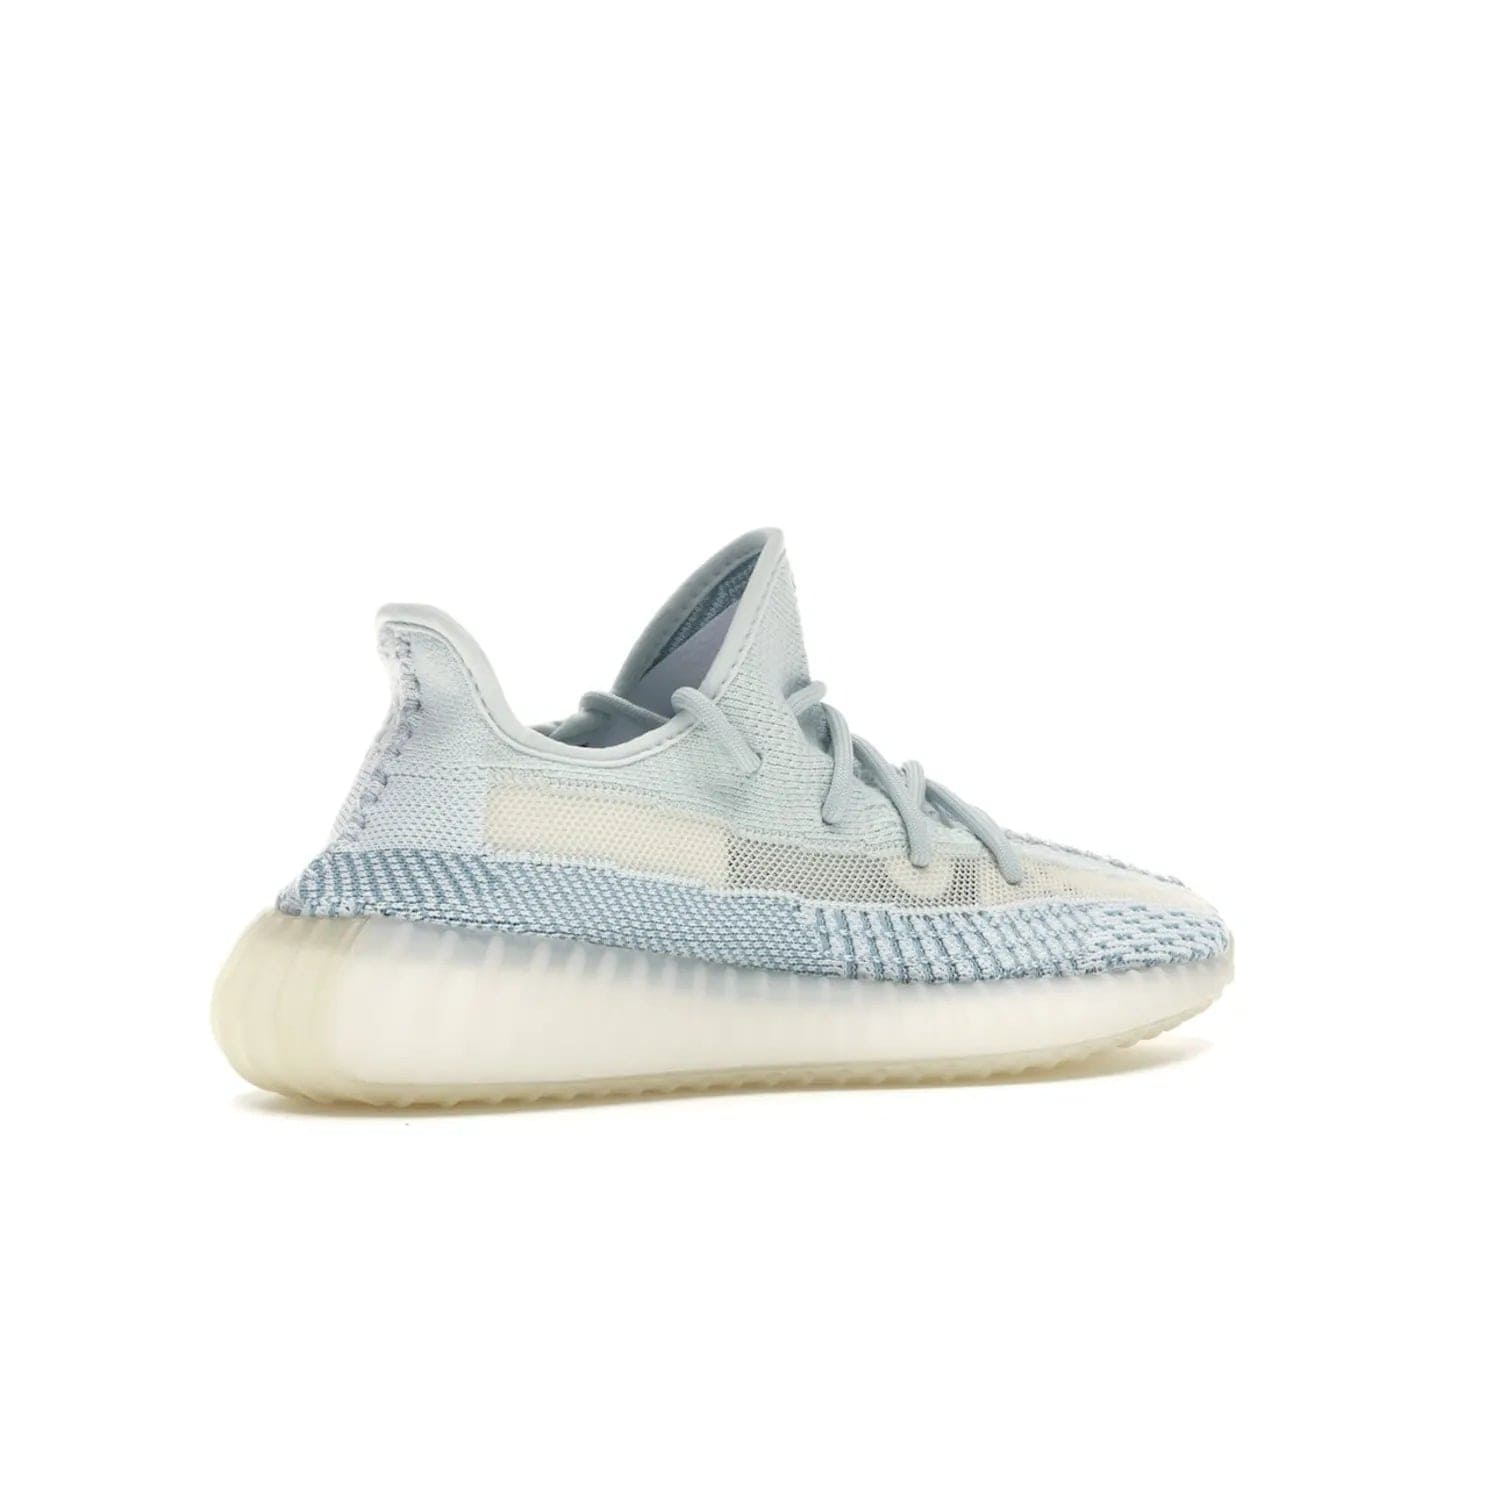 adidas Yeezy Boost 350 V2 Cloud White (Non-Reflective) - Image 34 - Only at www.BallersClubKickz.com - Adidas Yeezy Boost 350 V2 Cloud White (Non-Reflective) features Primeknit fabric and a unique, eye-catching design of cream, bluish-white, and transparent strip. Step out in timeless style with this eye-catching sneaker.